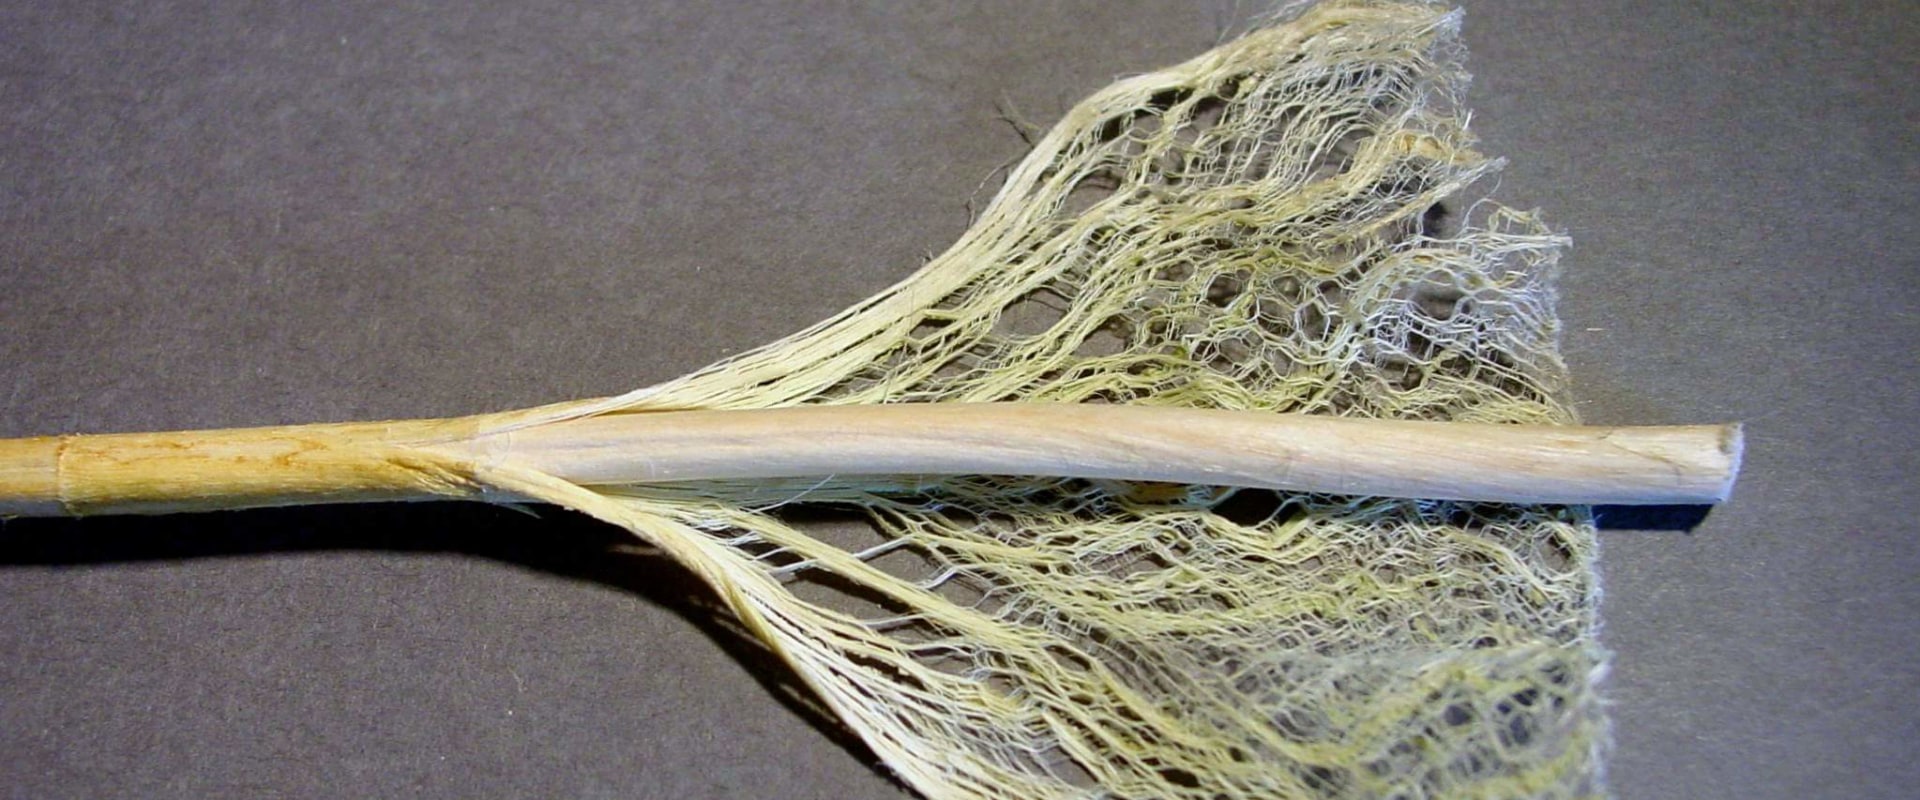 What are hemp stalks used for?